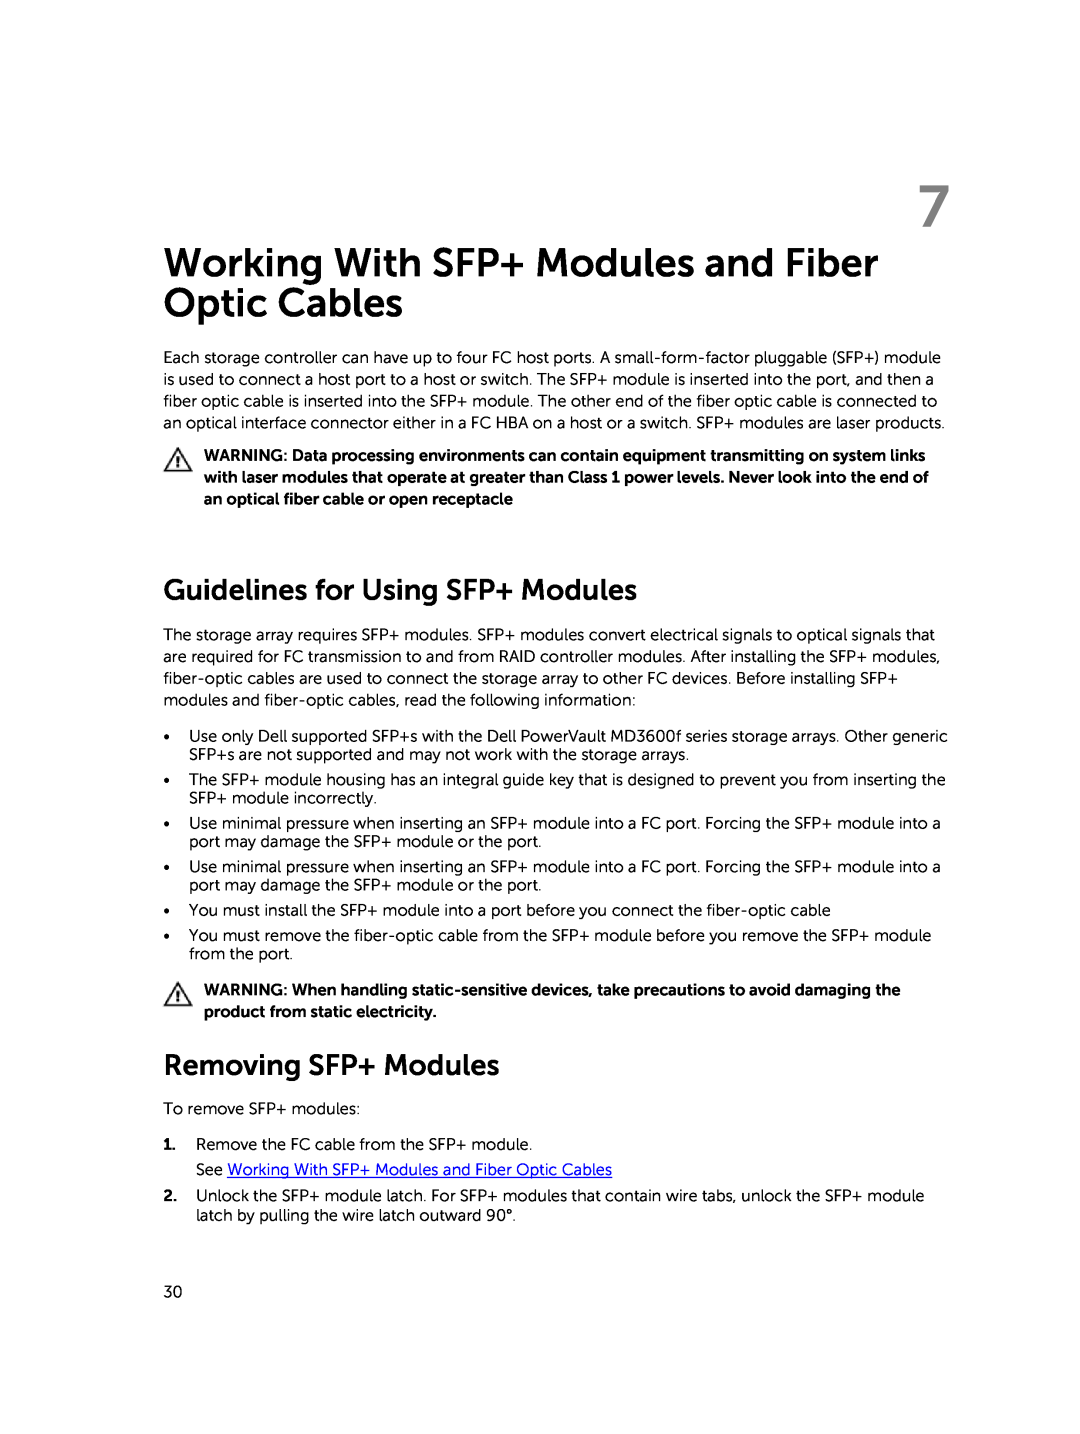 Dell MD3820f Working With SFP+ Modules and Fiber Optic Cables, Guidelines for Using SFP+ Modules, Removing SFP+ Modules 